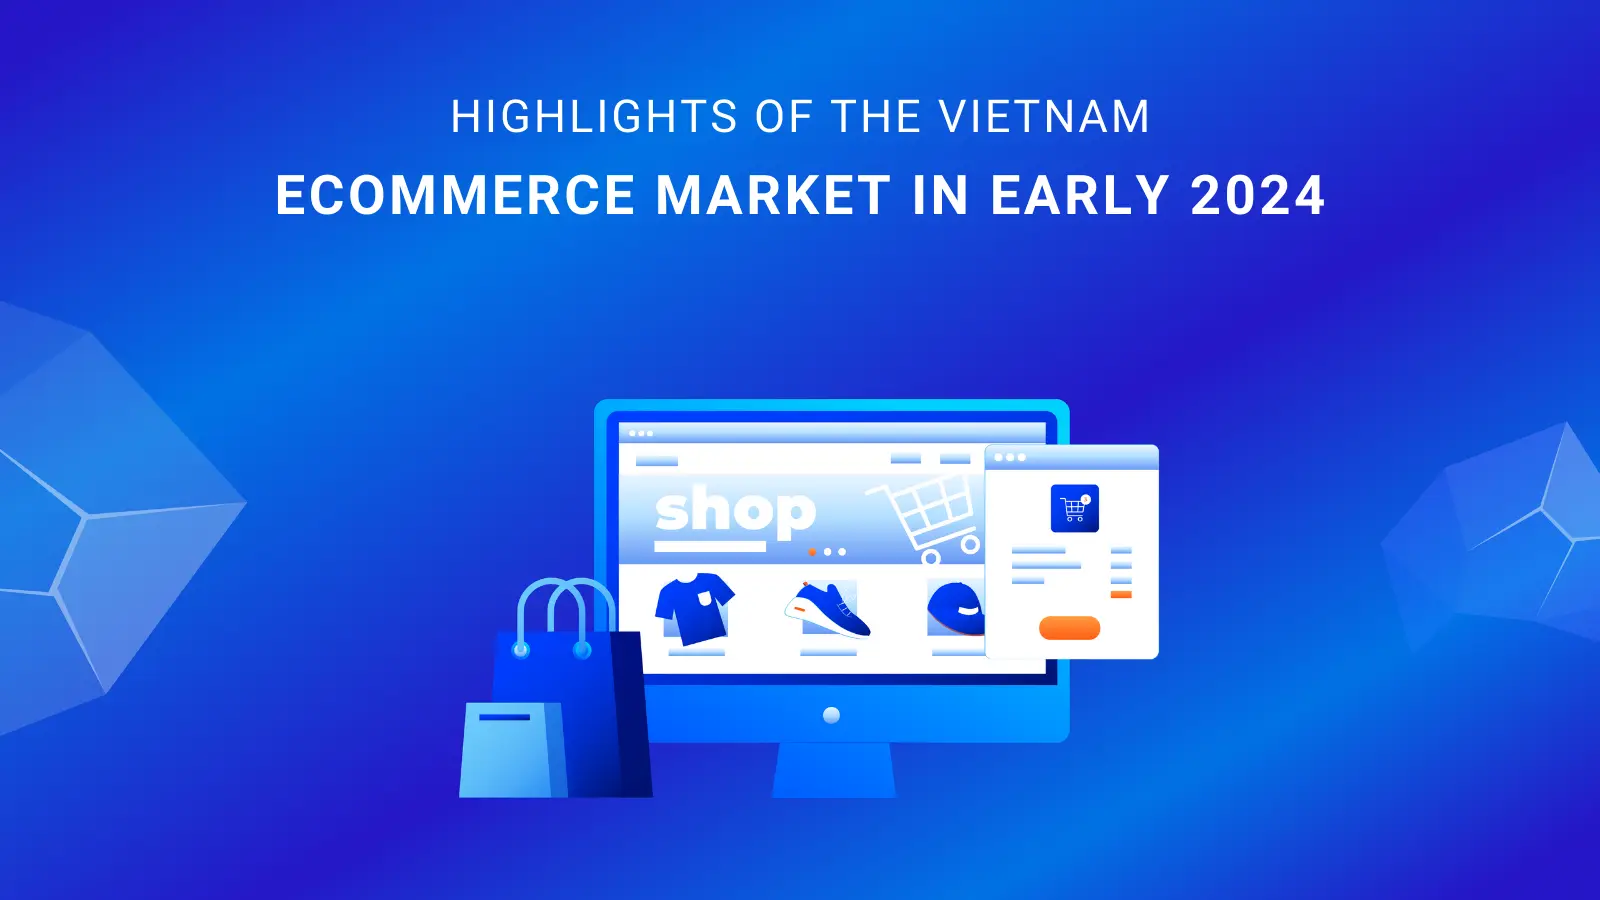 Highlights of the Vietnam eCommerce Market in Early 2024